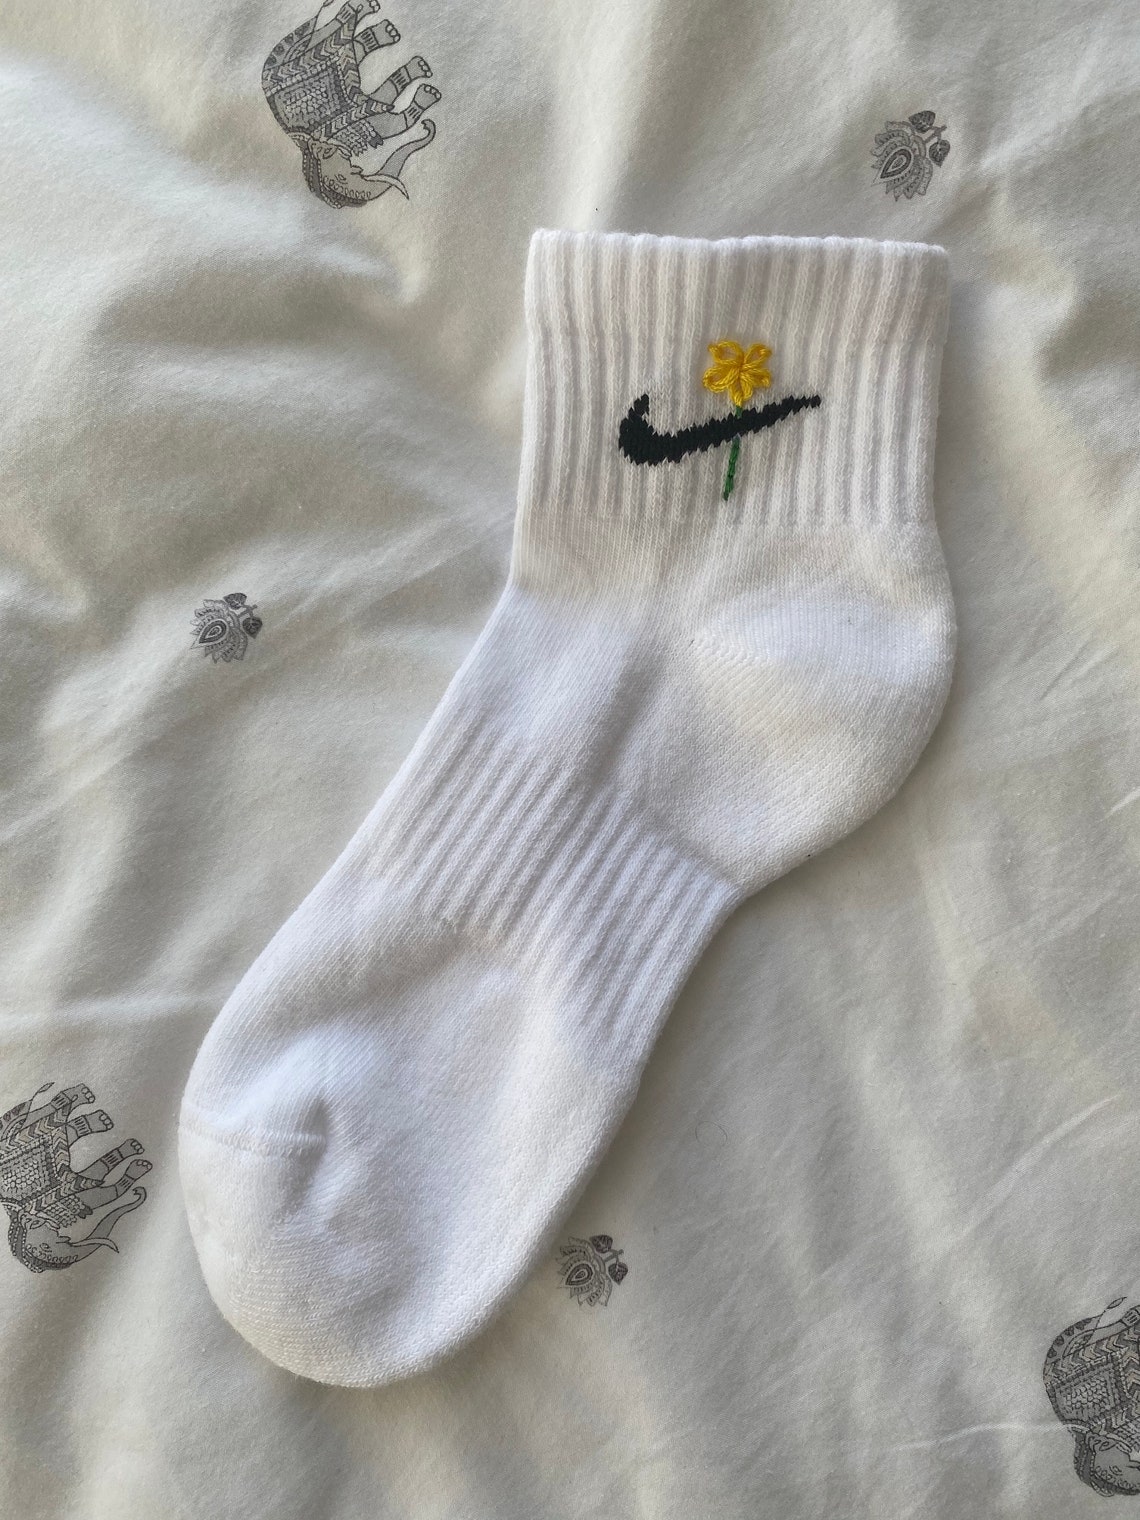 Official Nike ankle socks with bright yellow flower embroidery | Etsy